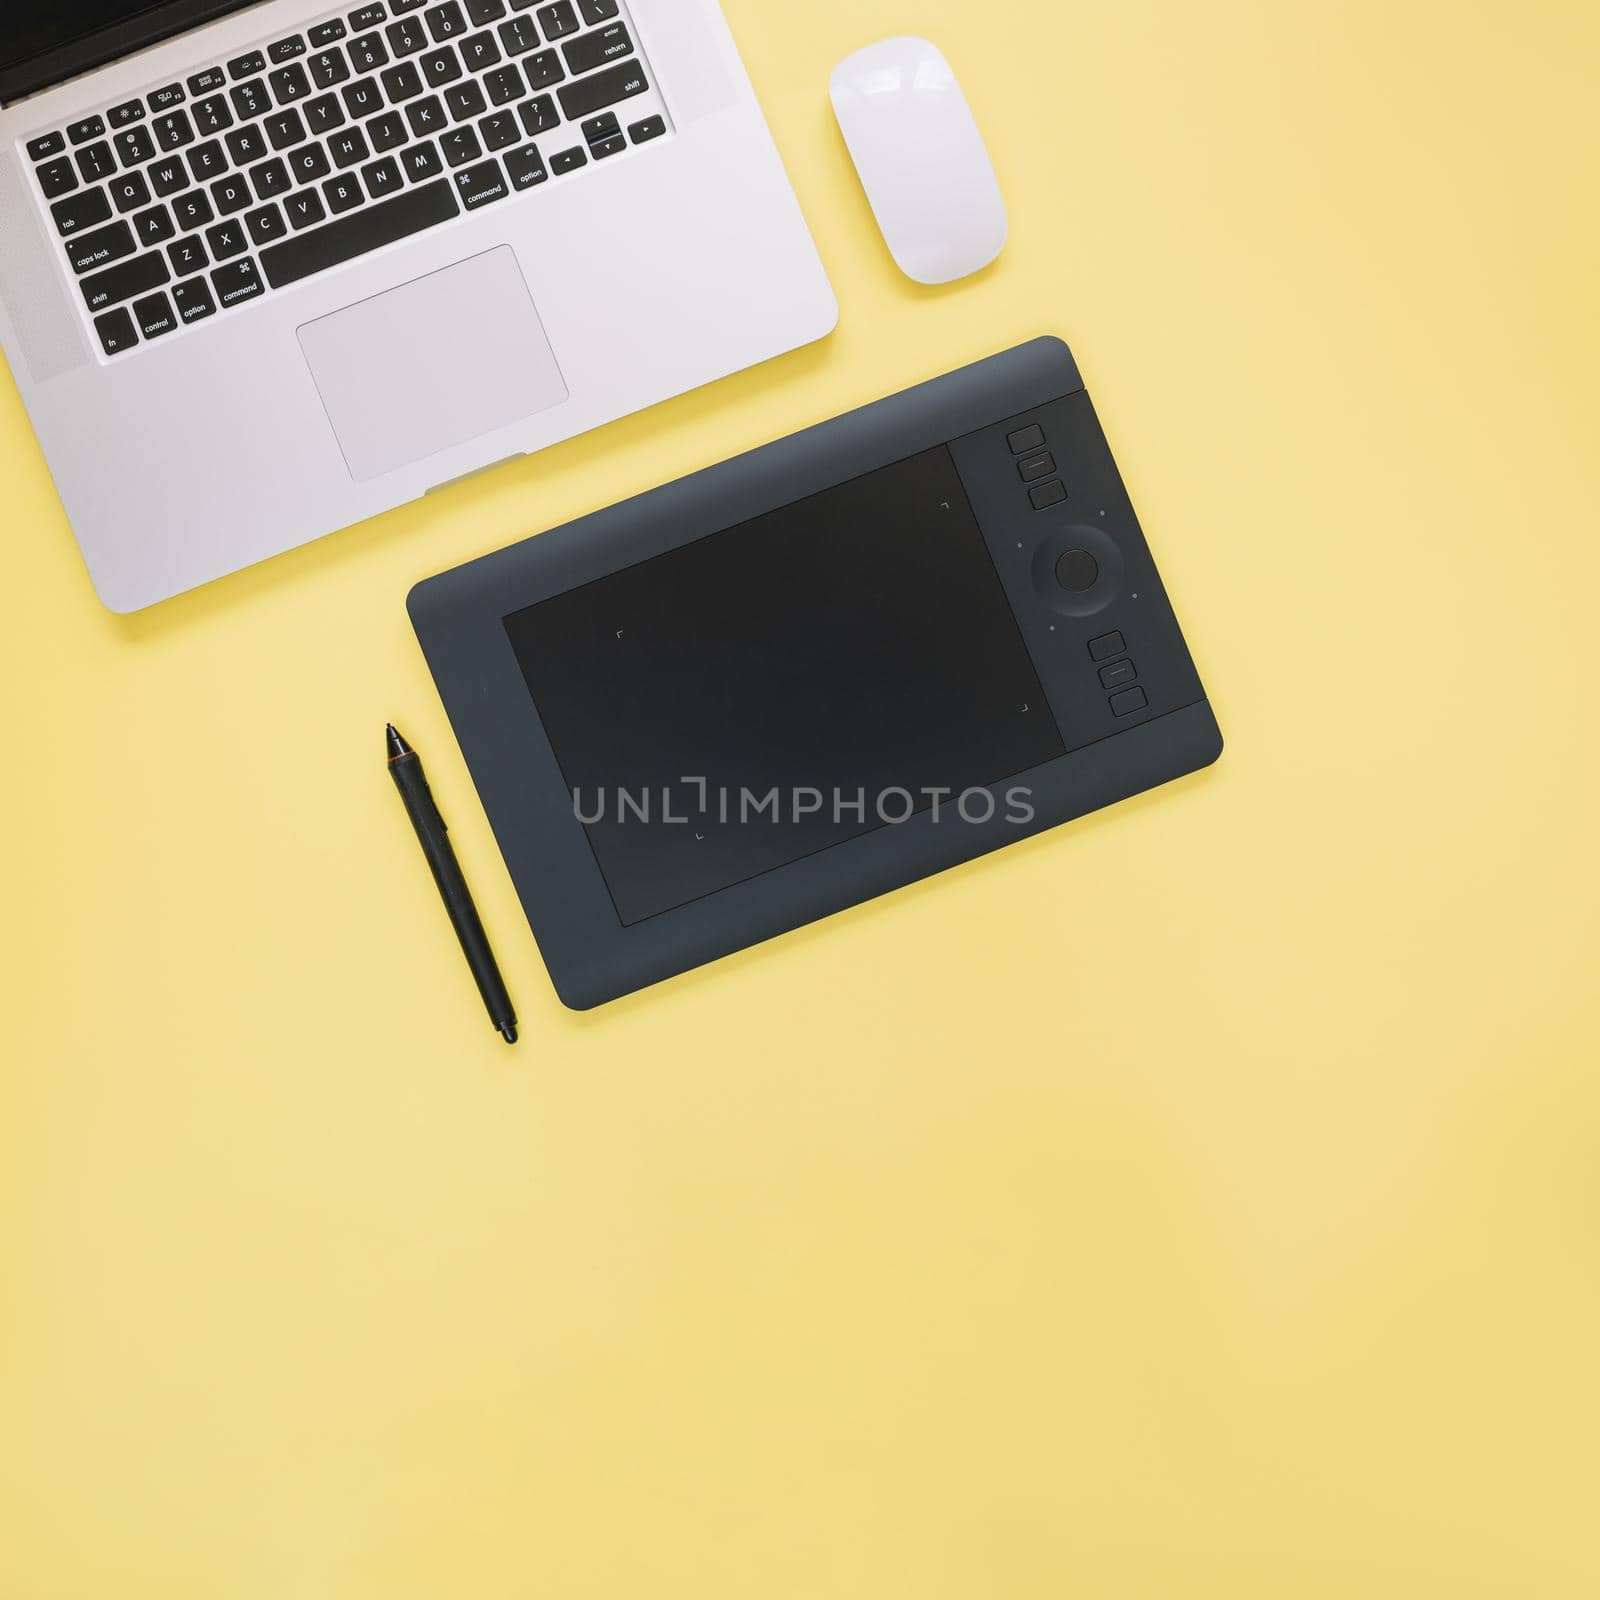 elevated view graphic digital tablet laptop yellow background by Zahard